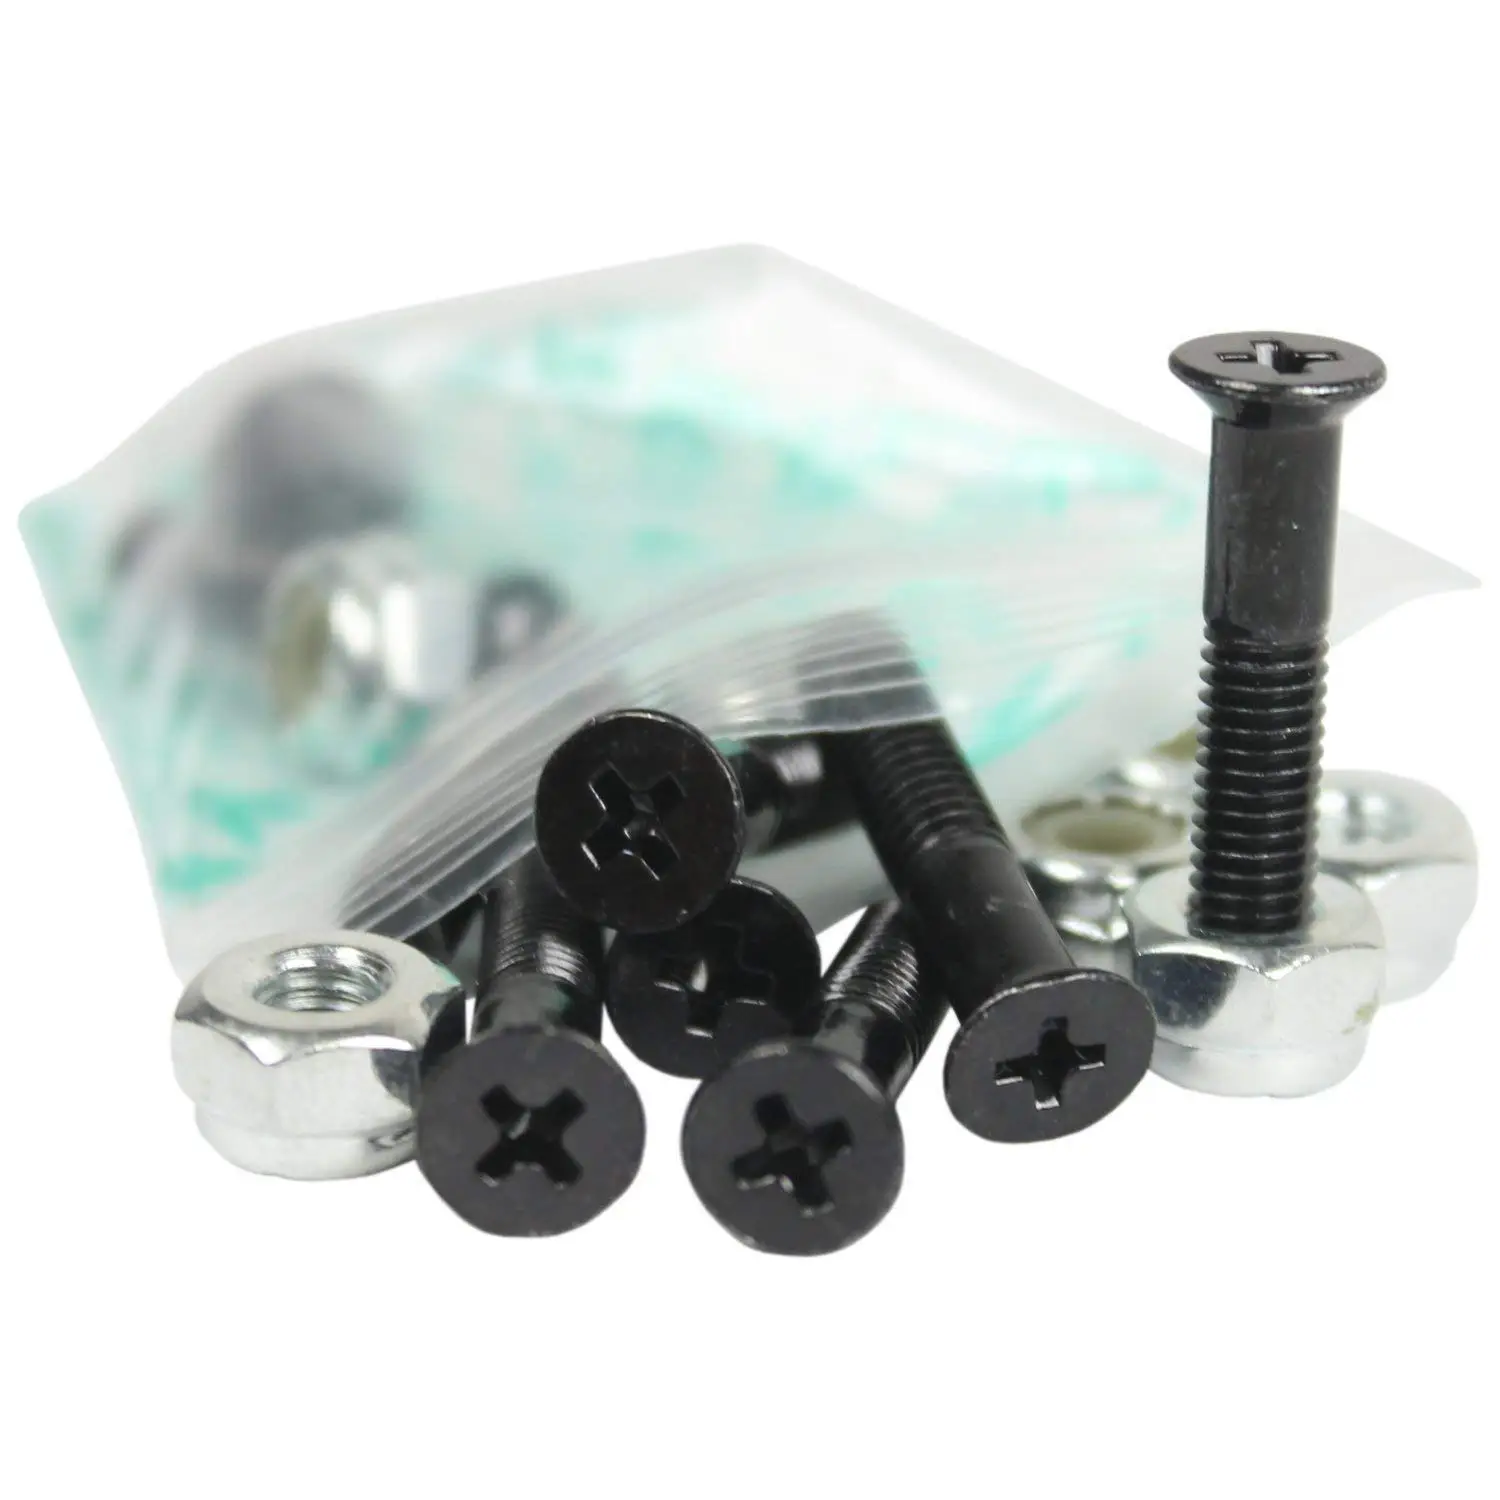 ECUDIS 200Pcs Zinc Plated Extension and Compression Industry Spring Assortment Replacement Kit